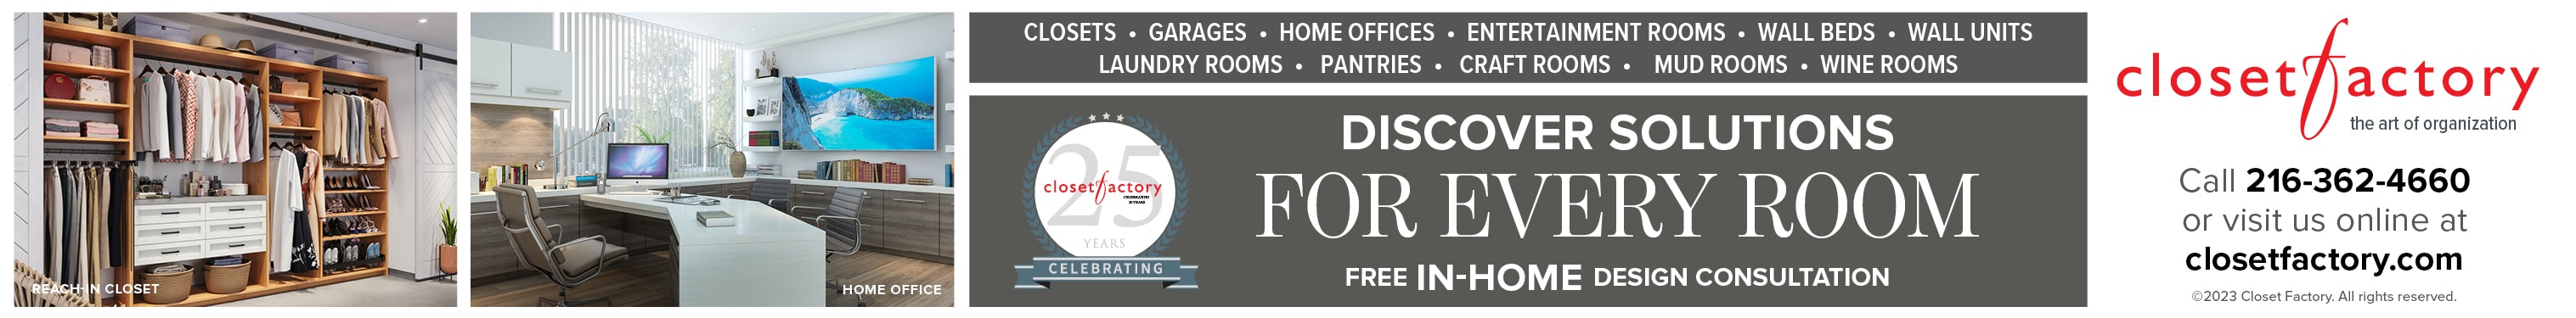 banner ad for cleveland location sale